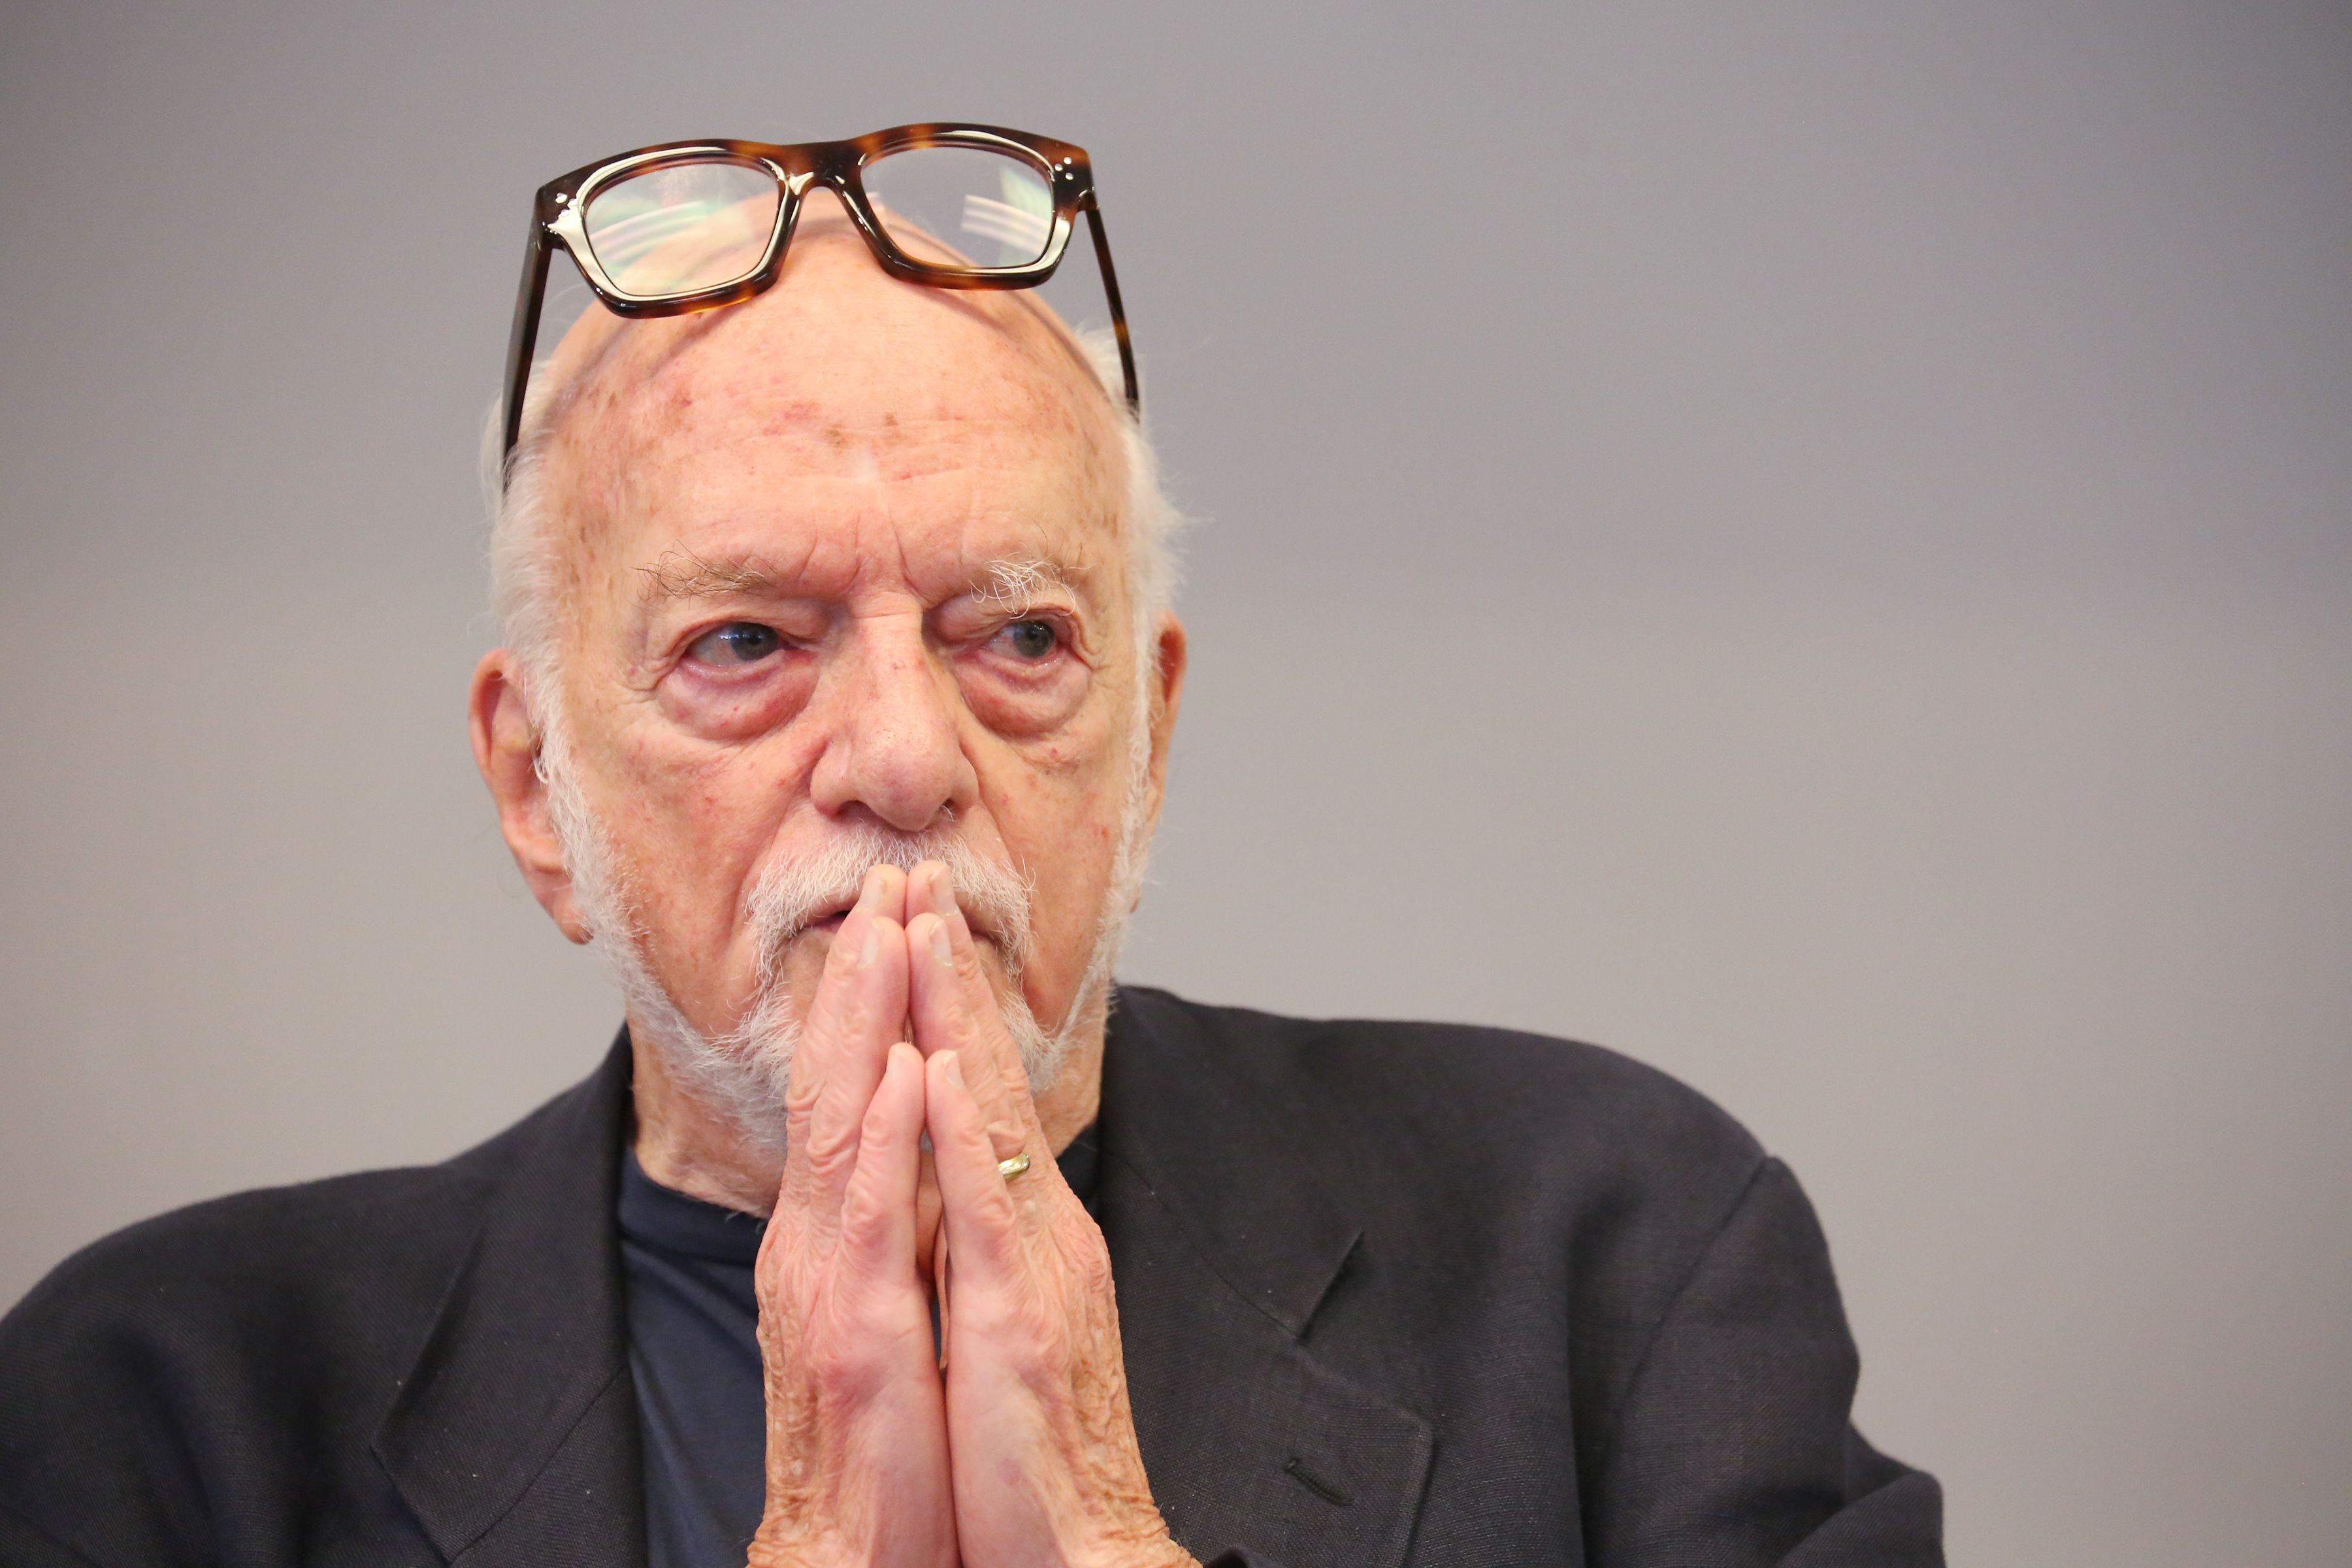 In this image, Hal Prince sits with glasses on his forehead.